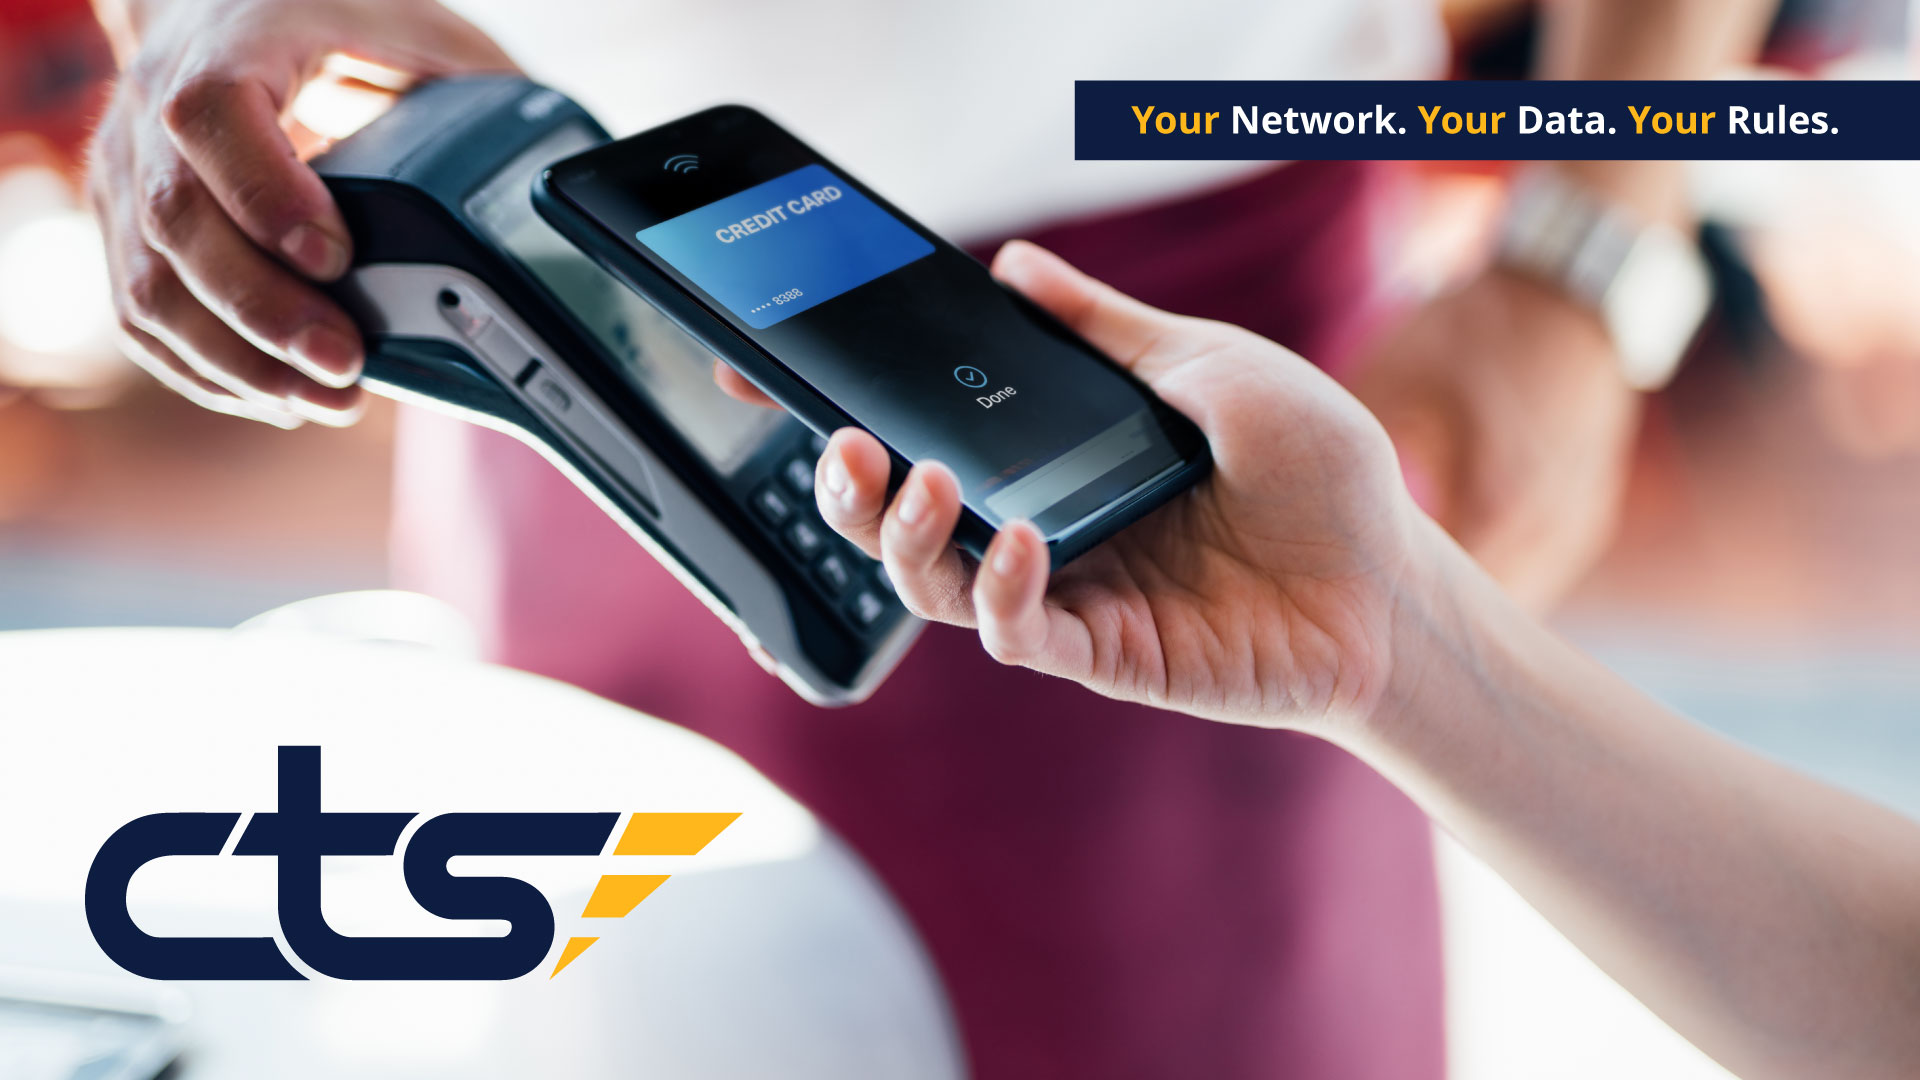 paying with phone. CTS logo. tagline Your Network. Your Data. Your Rules.